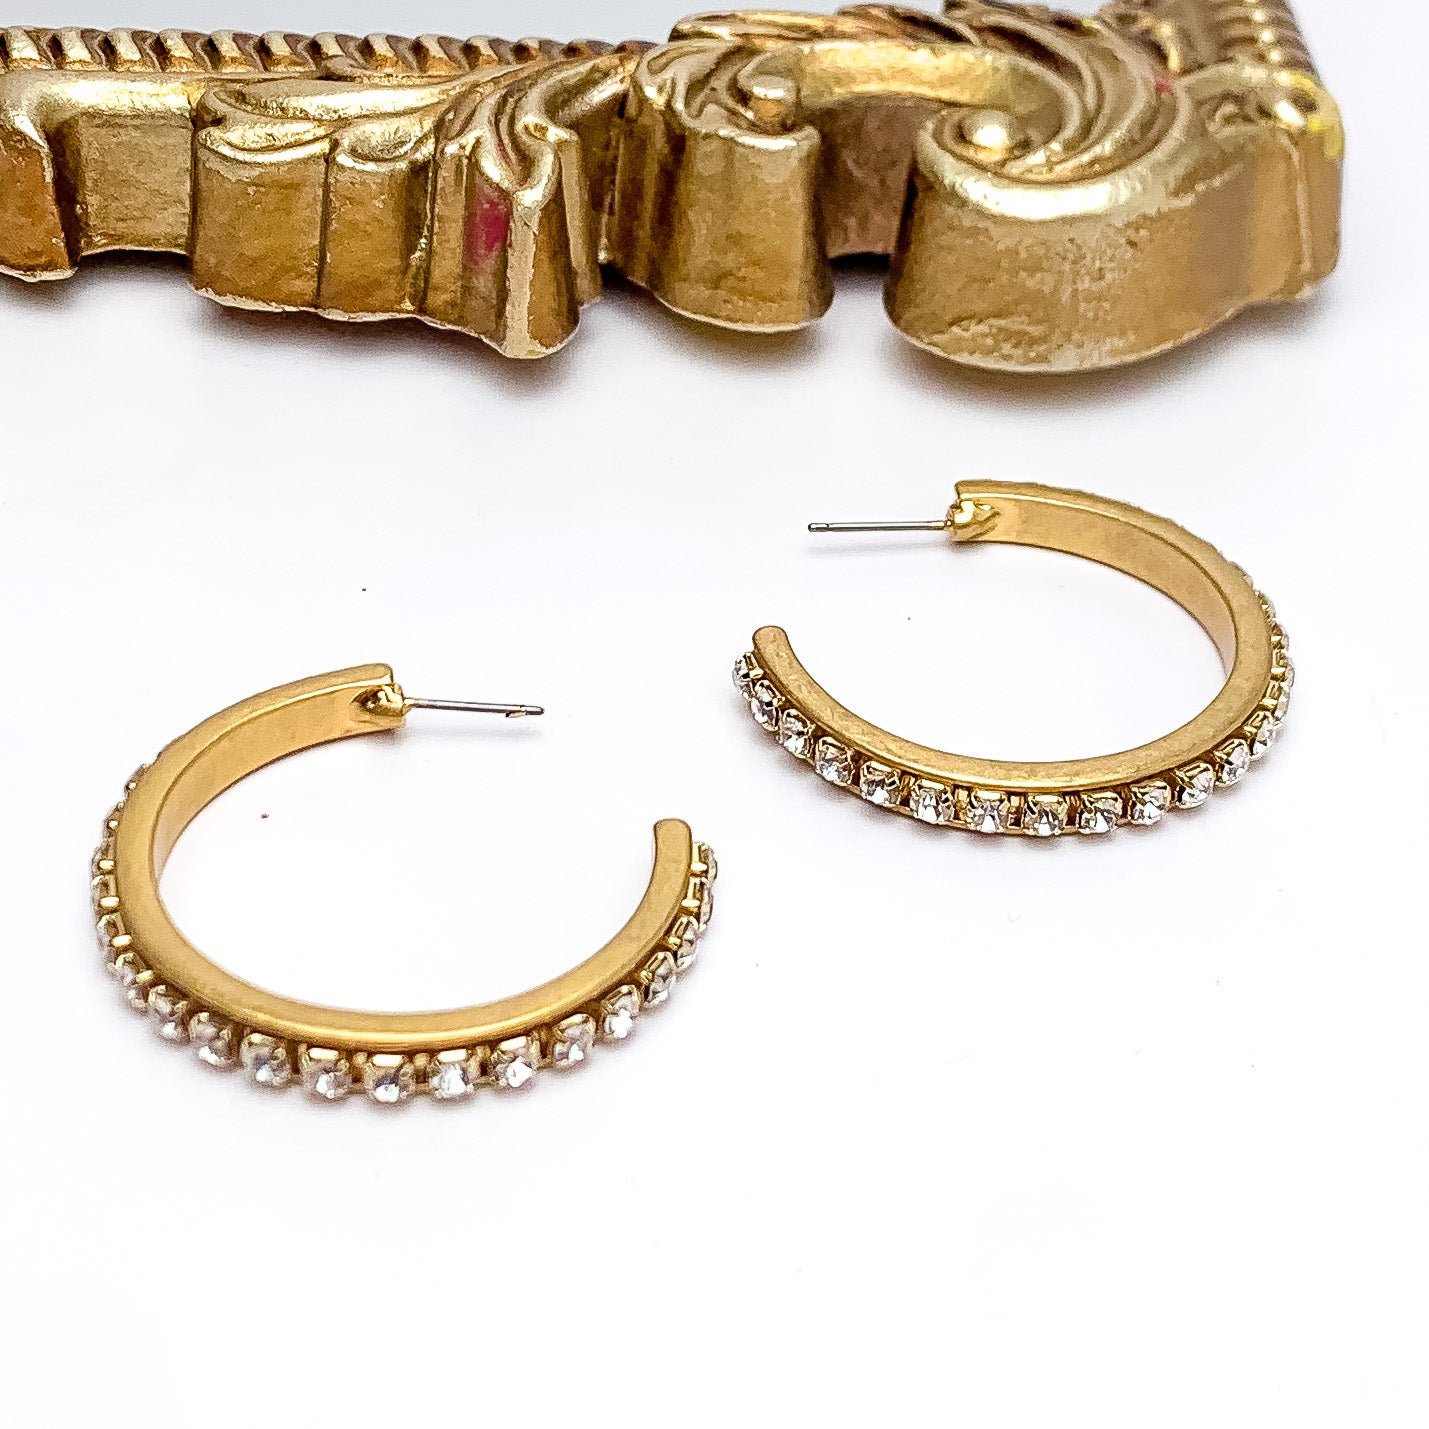 City Nights Gold Tone Hoop Earrings With Inlaid Clear Crystals. Pictured on a white background with a gold frame above the earrings.